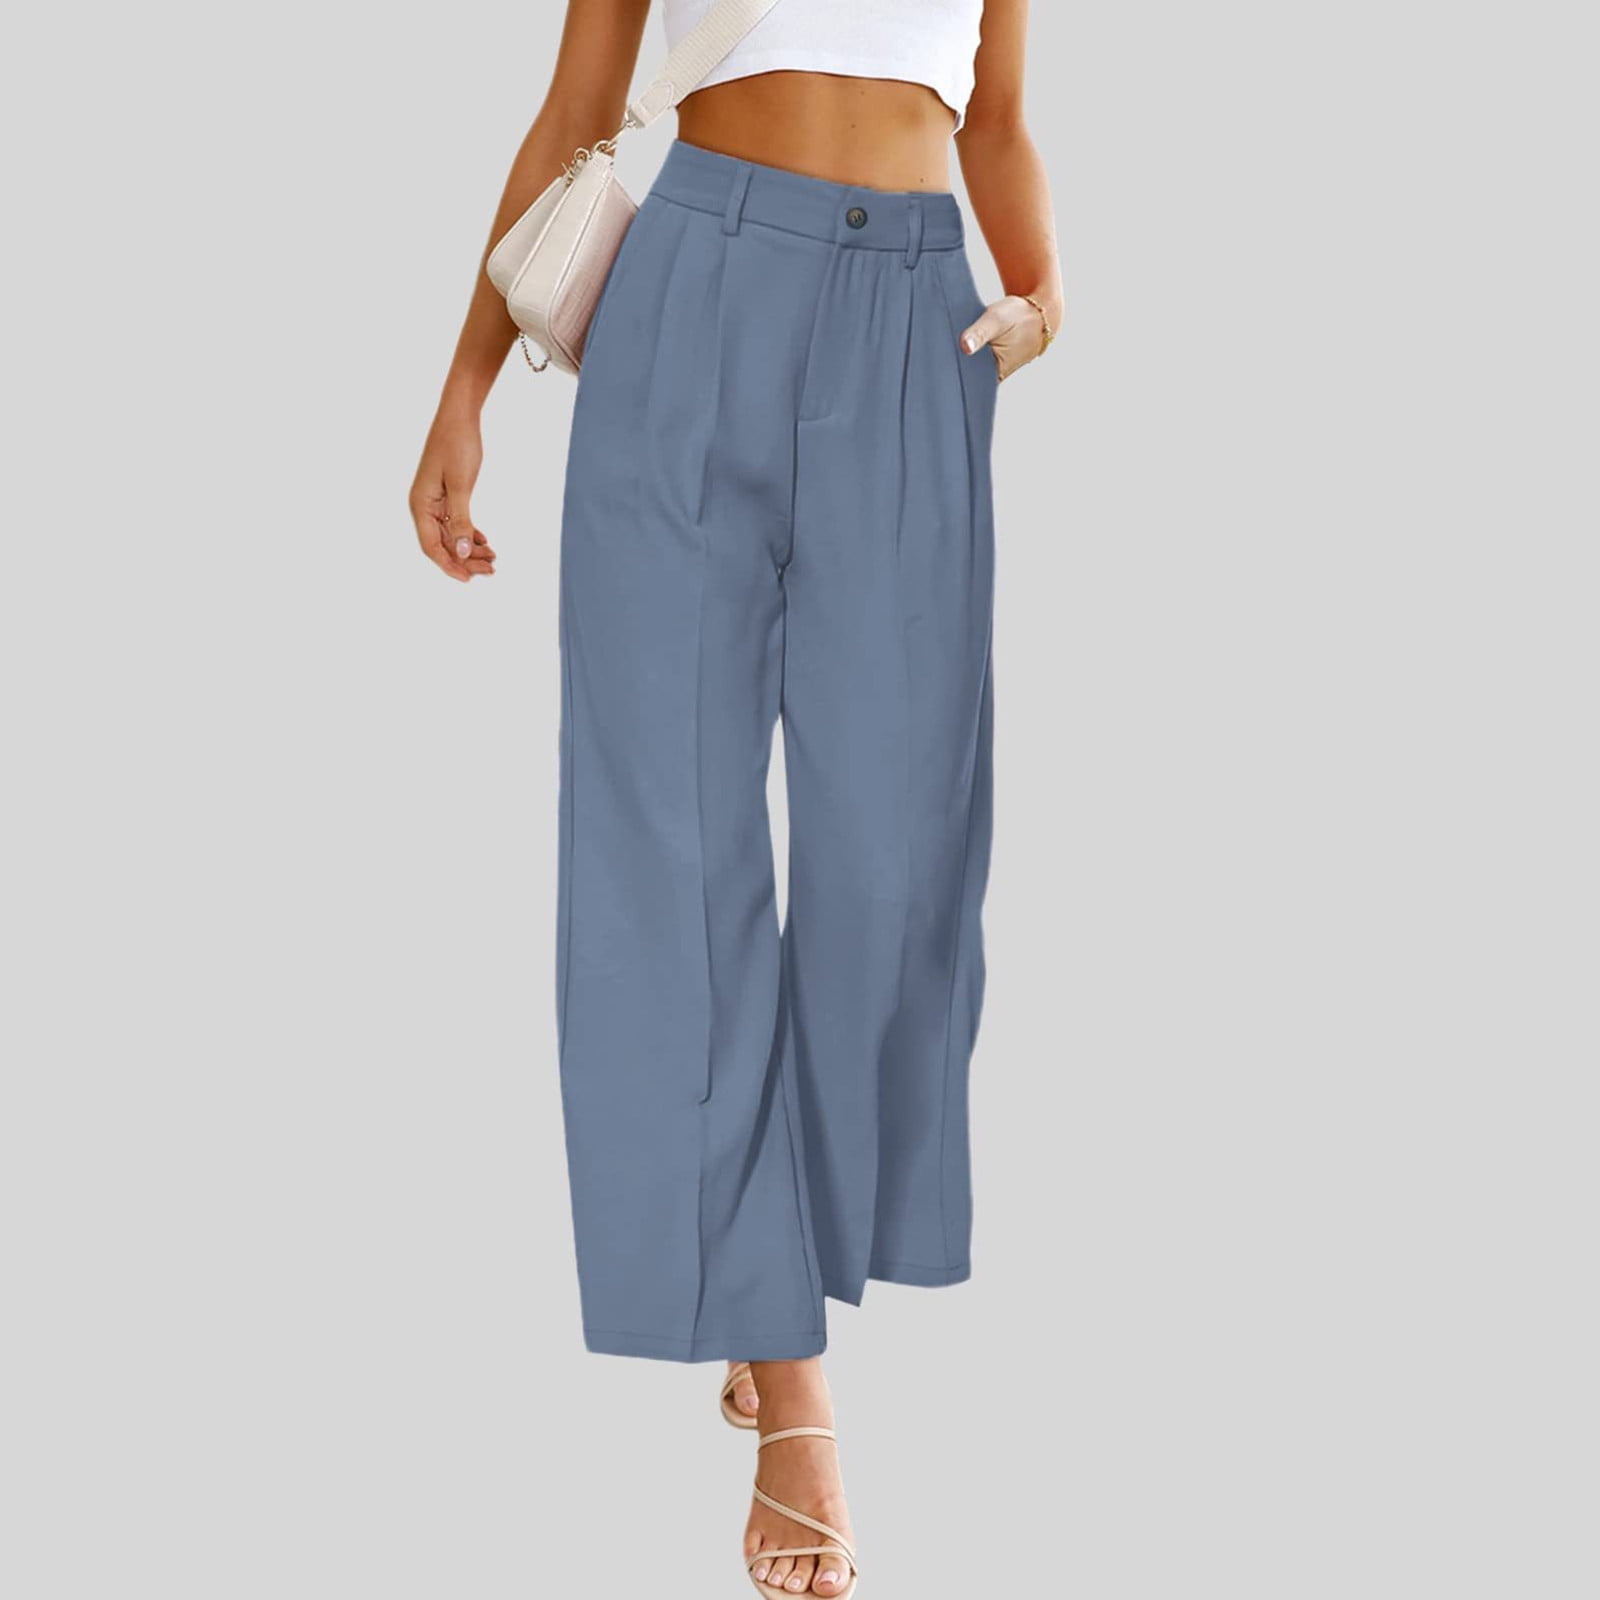 YWDJ Palazzo Pants for Women Petite High Waist High Rise Wide Leg Trendy  Casual with Belted Long Pant Solid Color High-waist Loose Pants A Popular